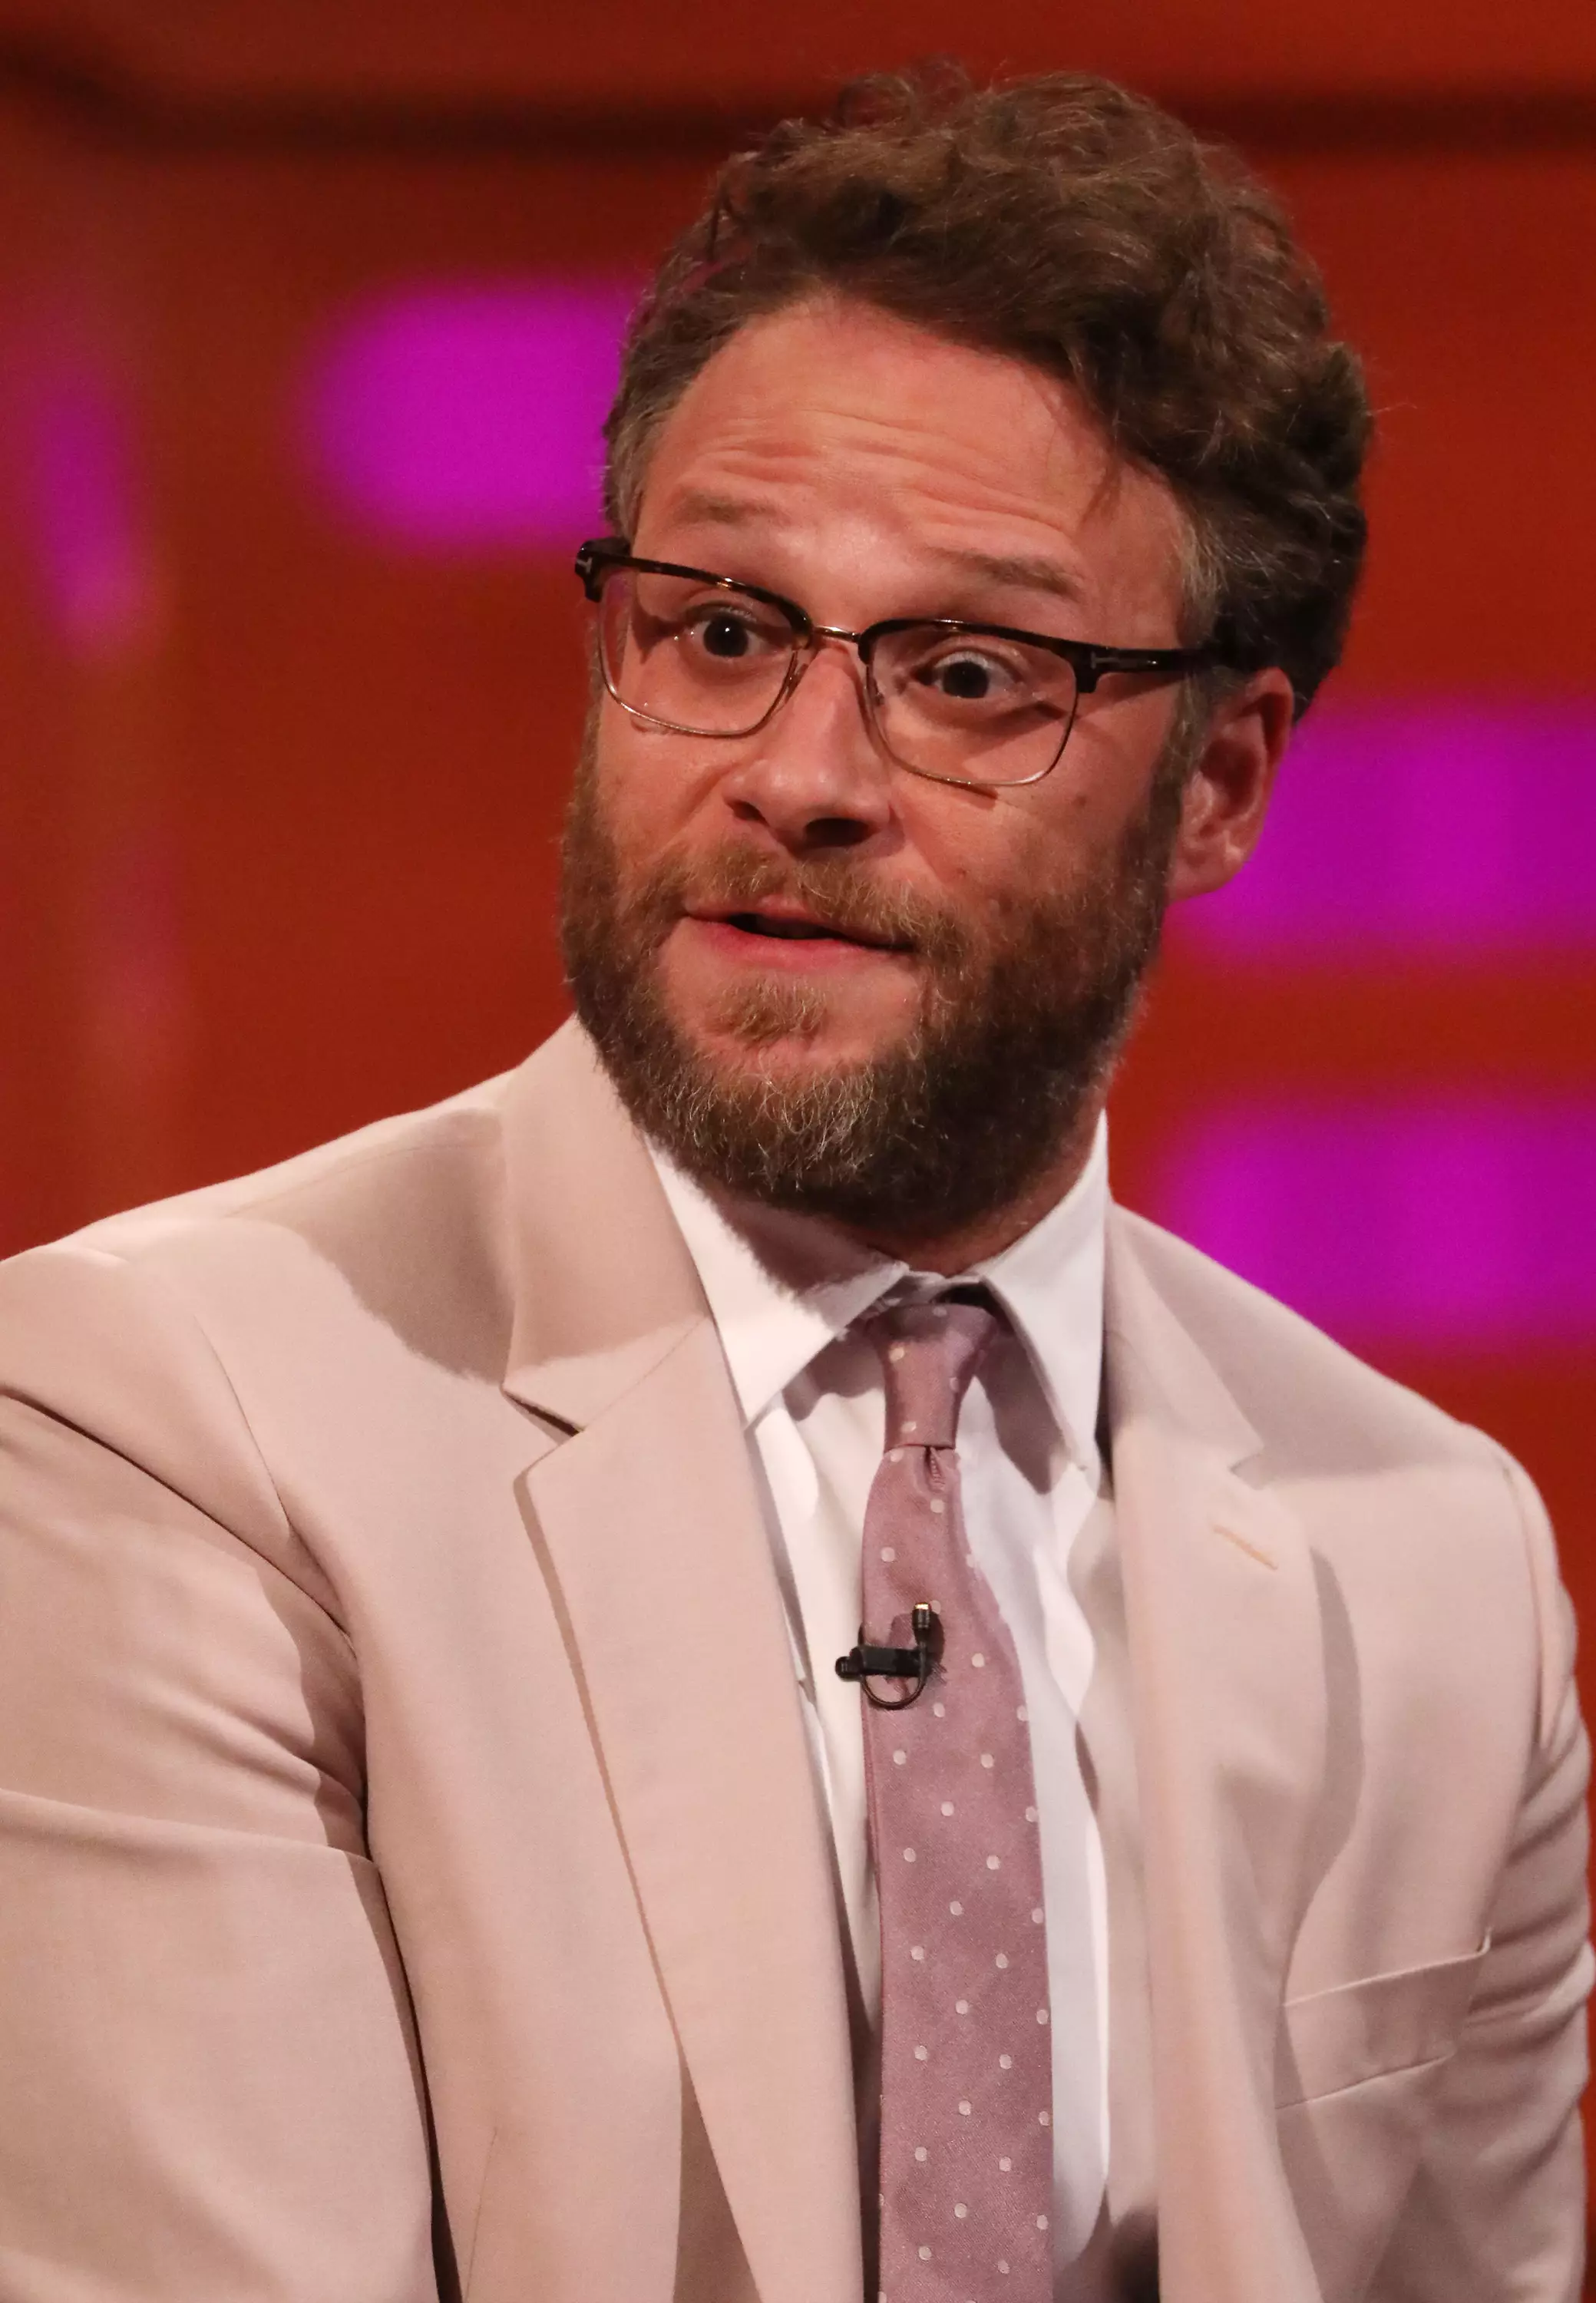 Seth Rogen says his weed smoking doesn't stop when he is on set.